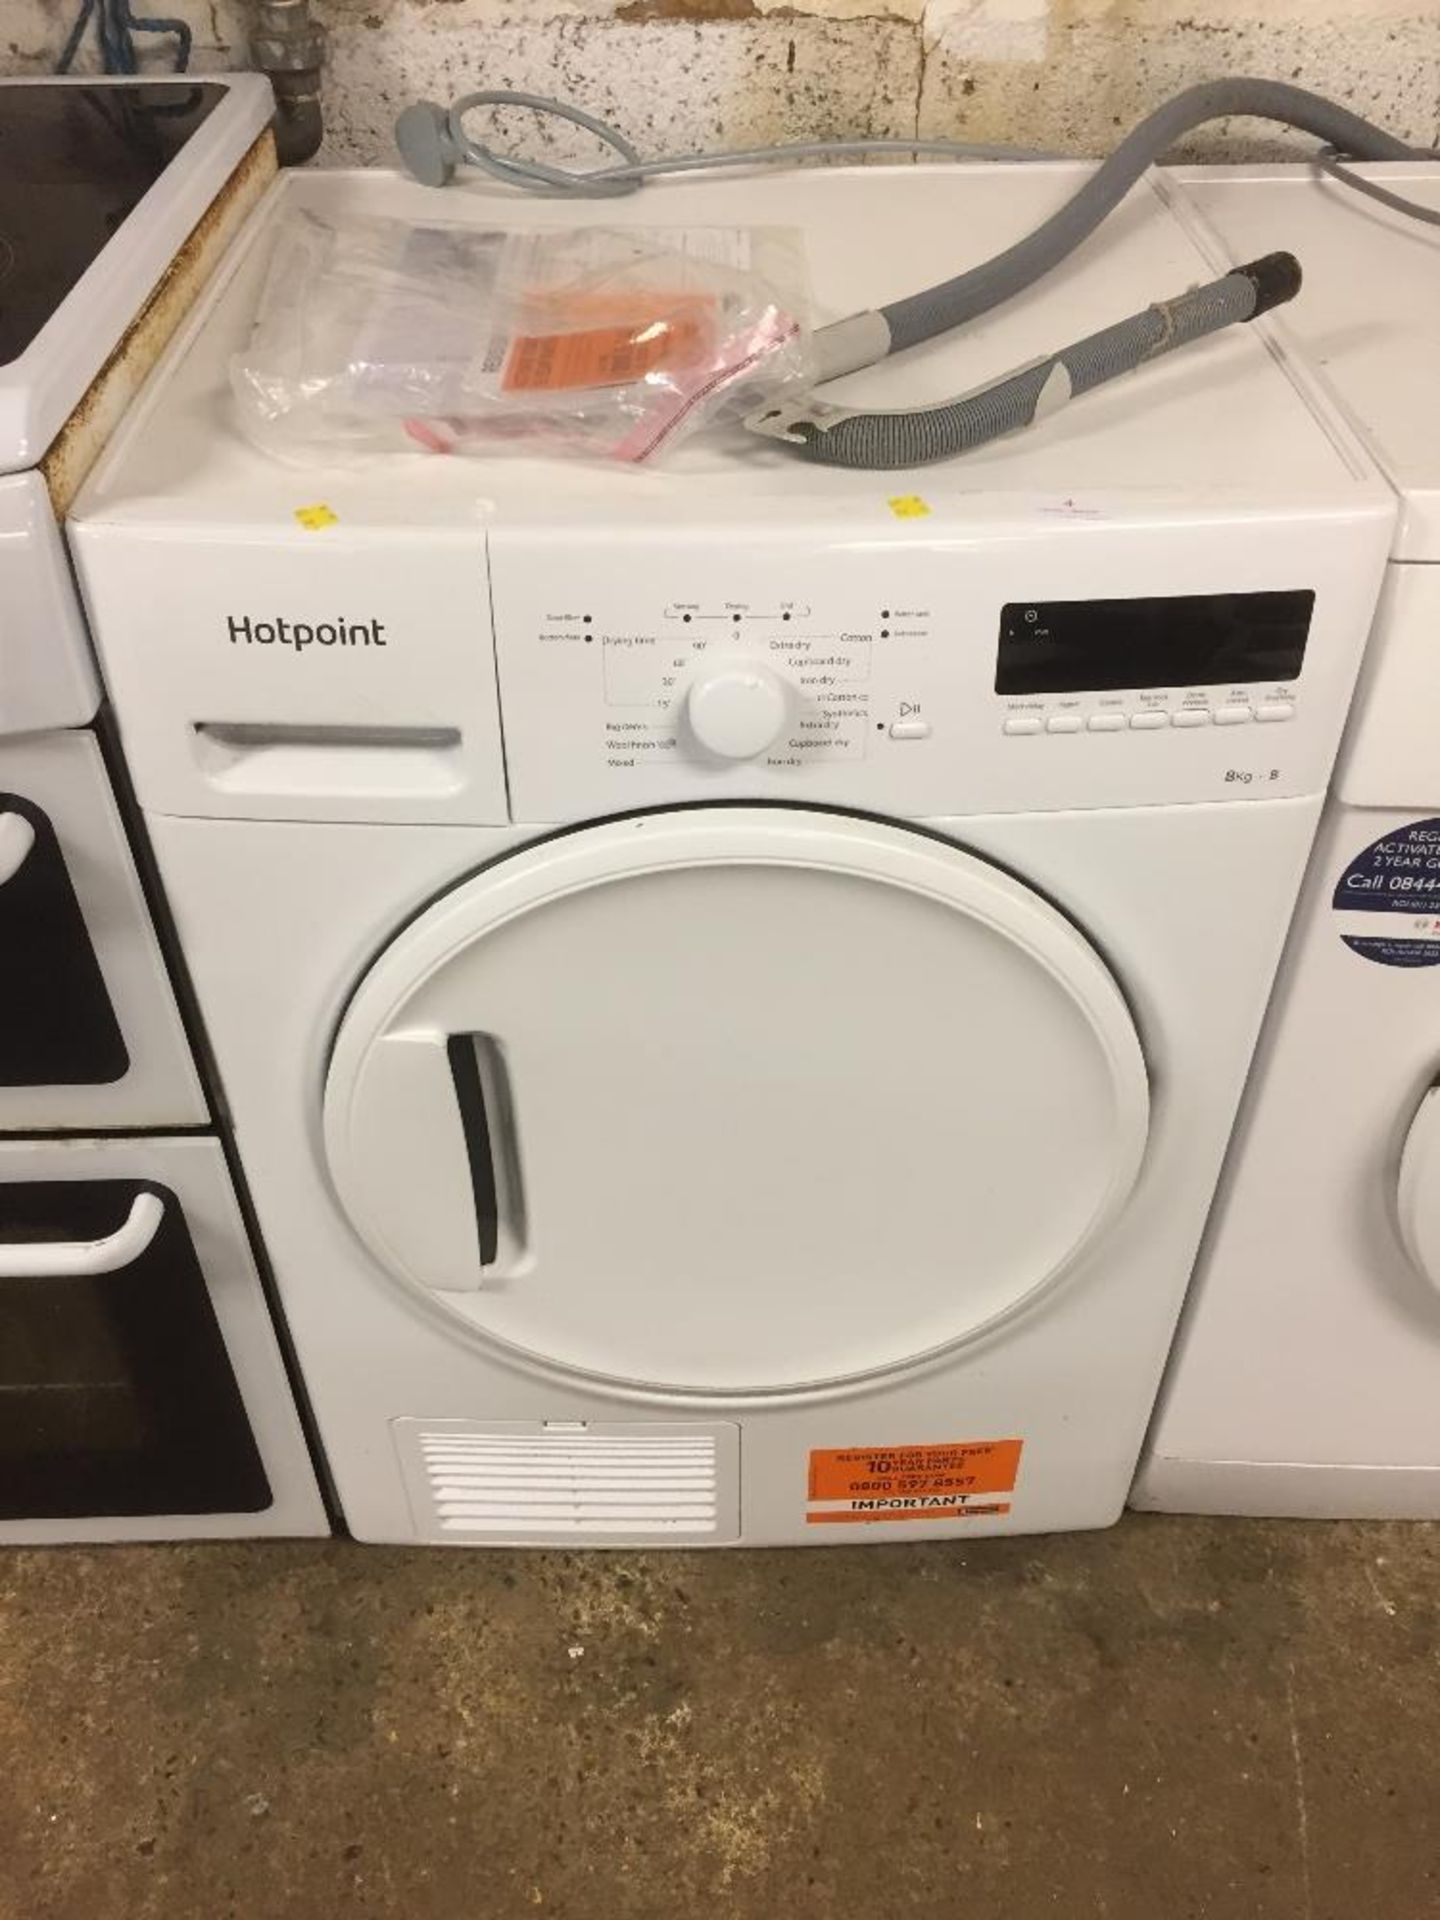 HOTPOINT 8KG CONDENSER TUMBLE DRYER - WARRANTED UNTIL 12 NOON TUESDAY FOLLOWING THE ABOVE SALE